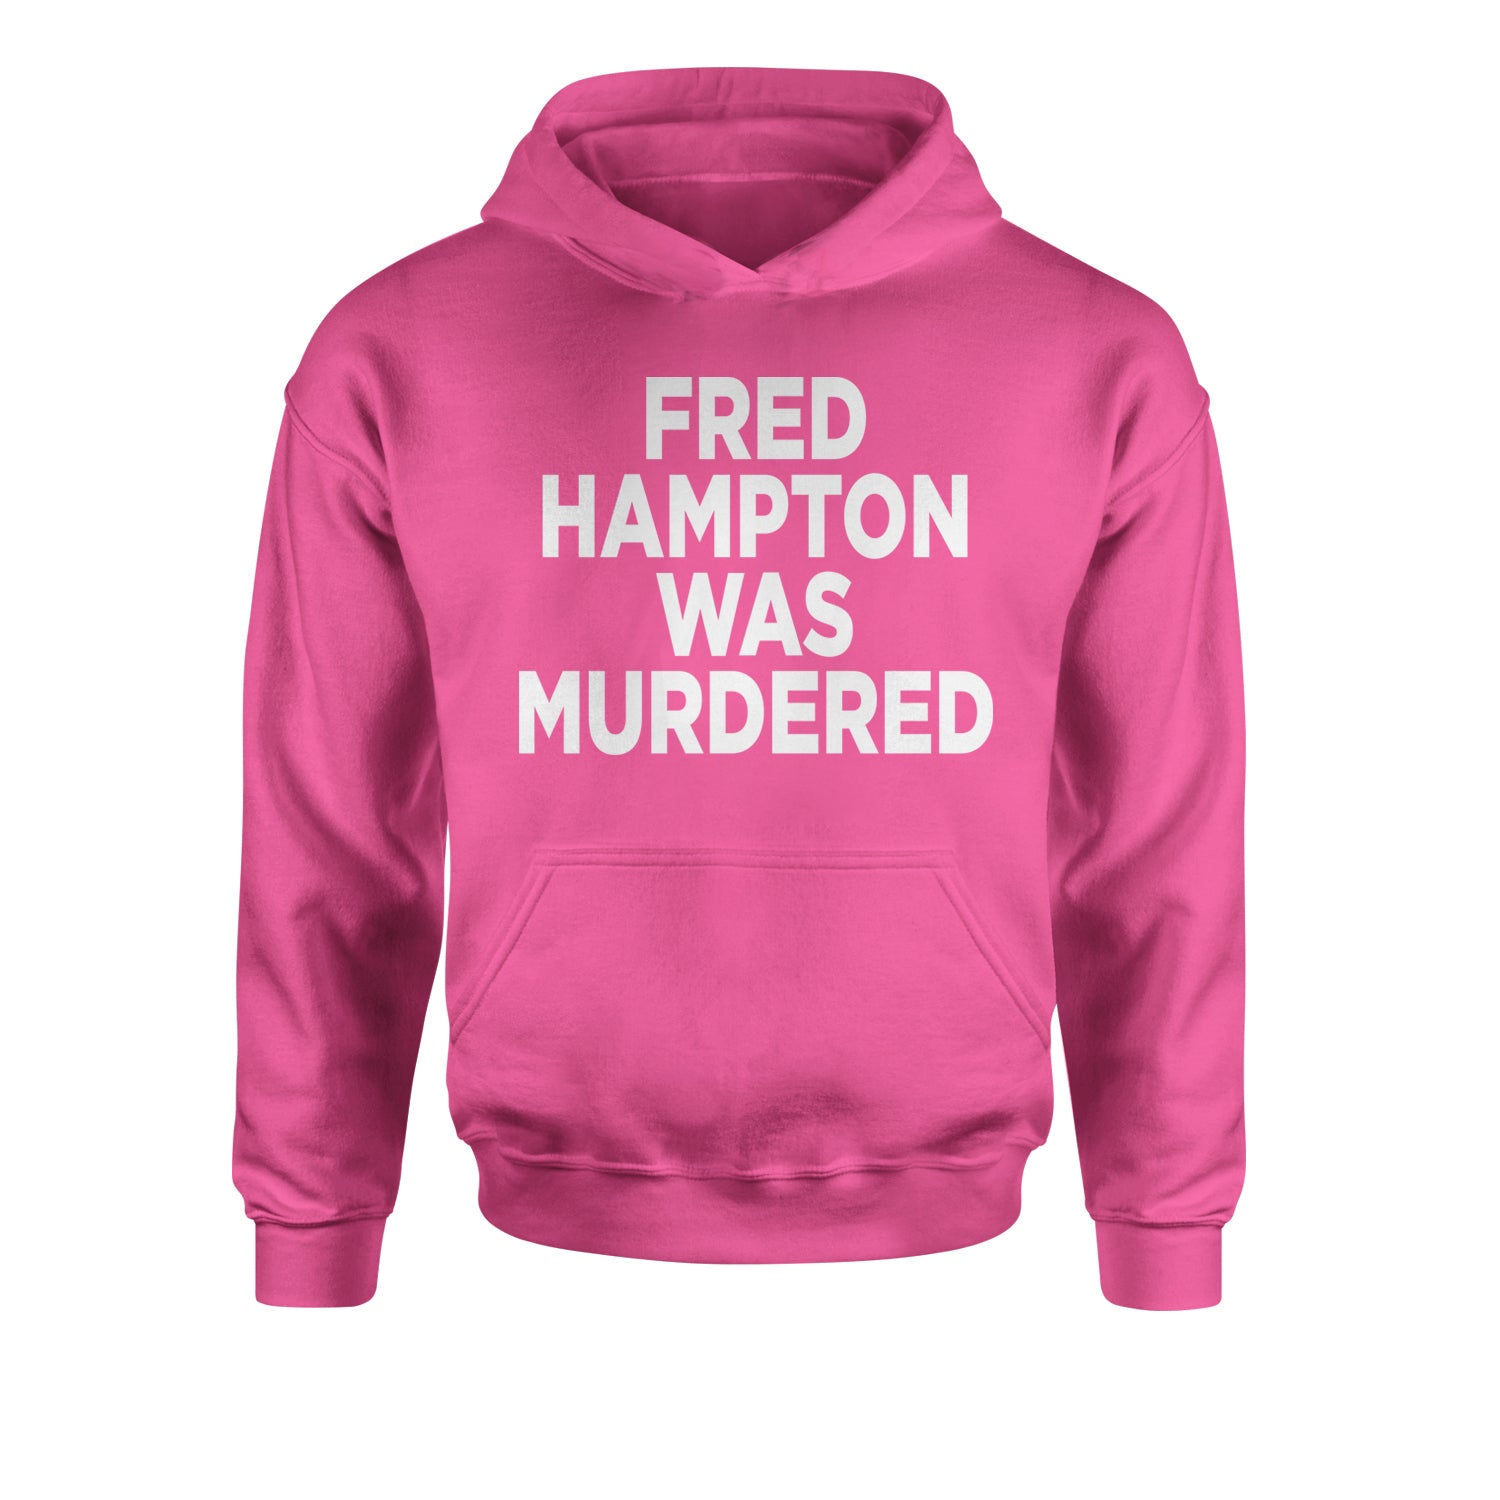 Fred Hampton Was Murdered Youth-Sized Hoodie activism, african, africanamerican, american, black, blm, brutality, eddie, lives, matter, murphy, people, police, you by Expression Tees